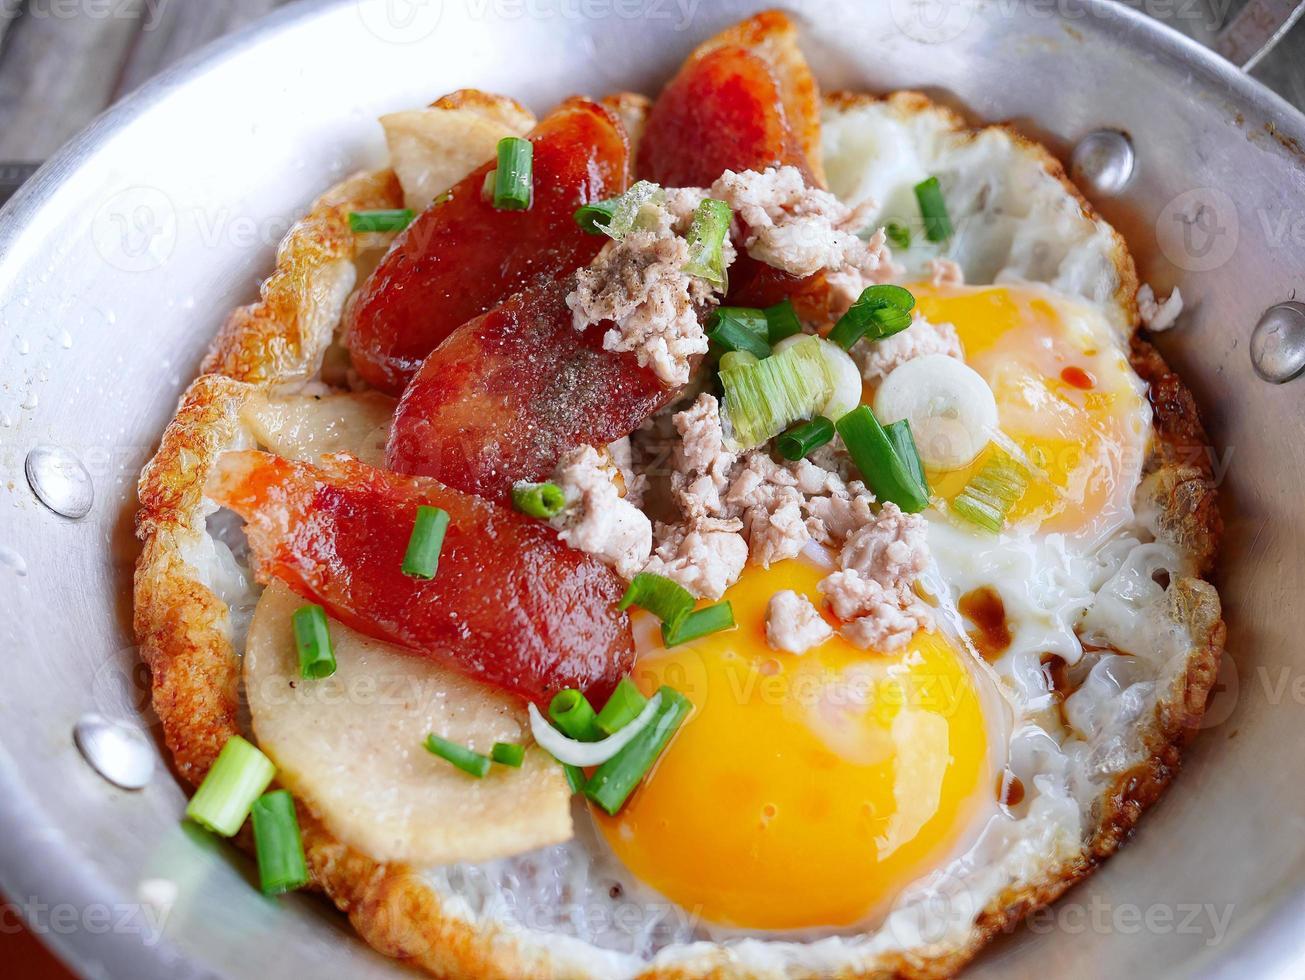 https://static.vecteezy.com/system/resources/previews/009/101/616/non_2x/close-up-top-view-vibrant-color-pan-fried-eggs-mince-pork-and-chinese-sausage-delicious-breakfast-thai-local-menu-photo.JPG